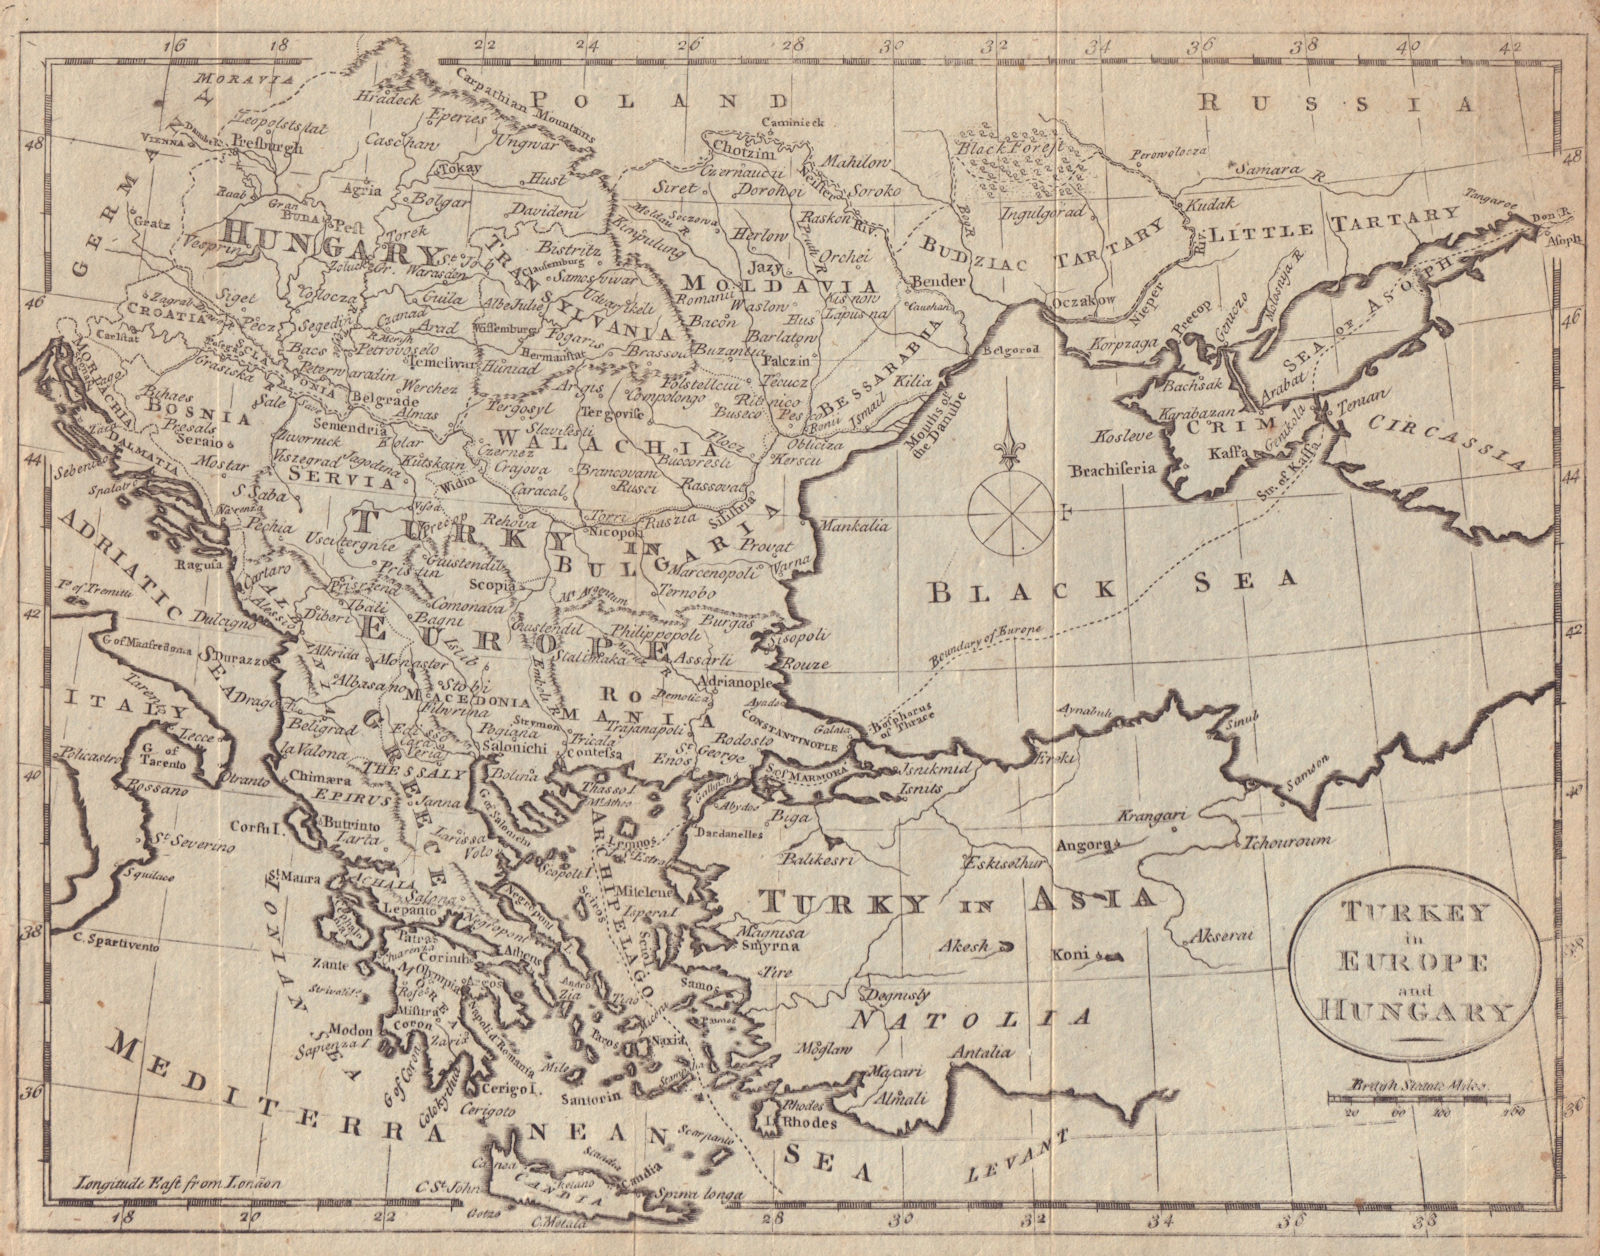 Associate Product Turkey in Europe and Hungary. Balkans Greece Ukraine. GUTHRIE 1787 old map